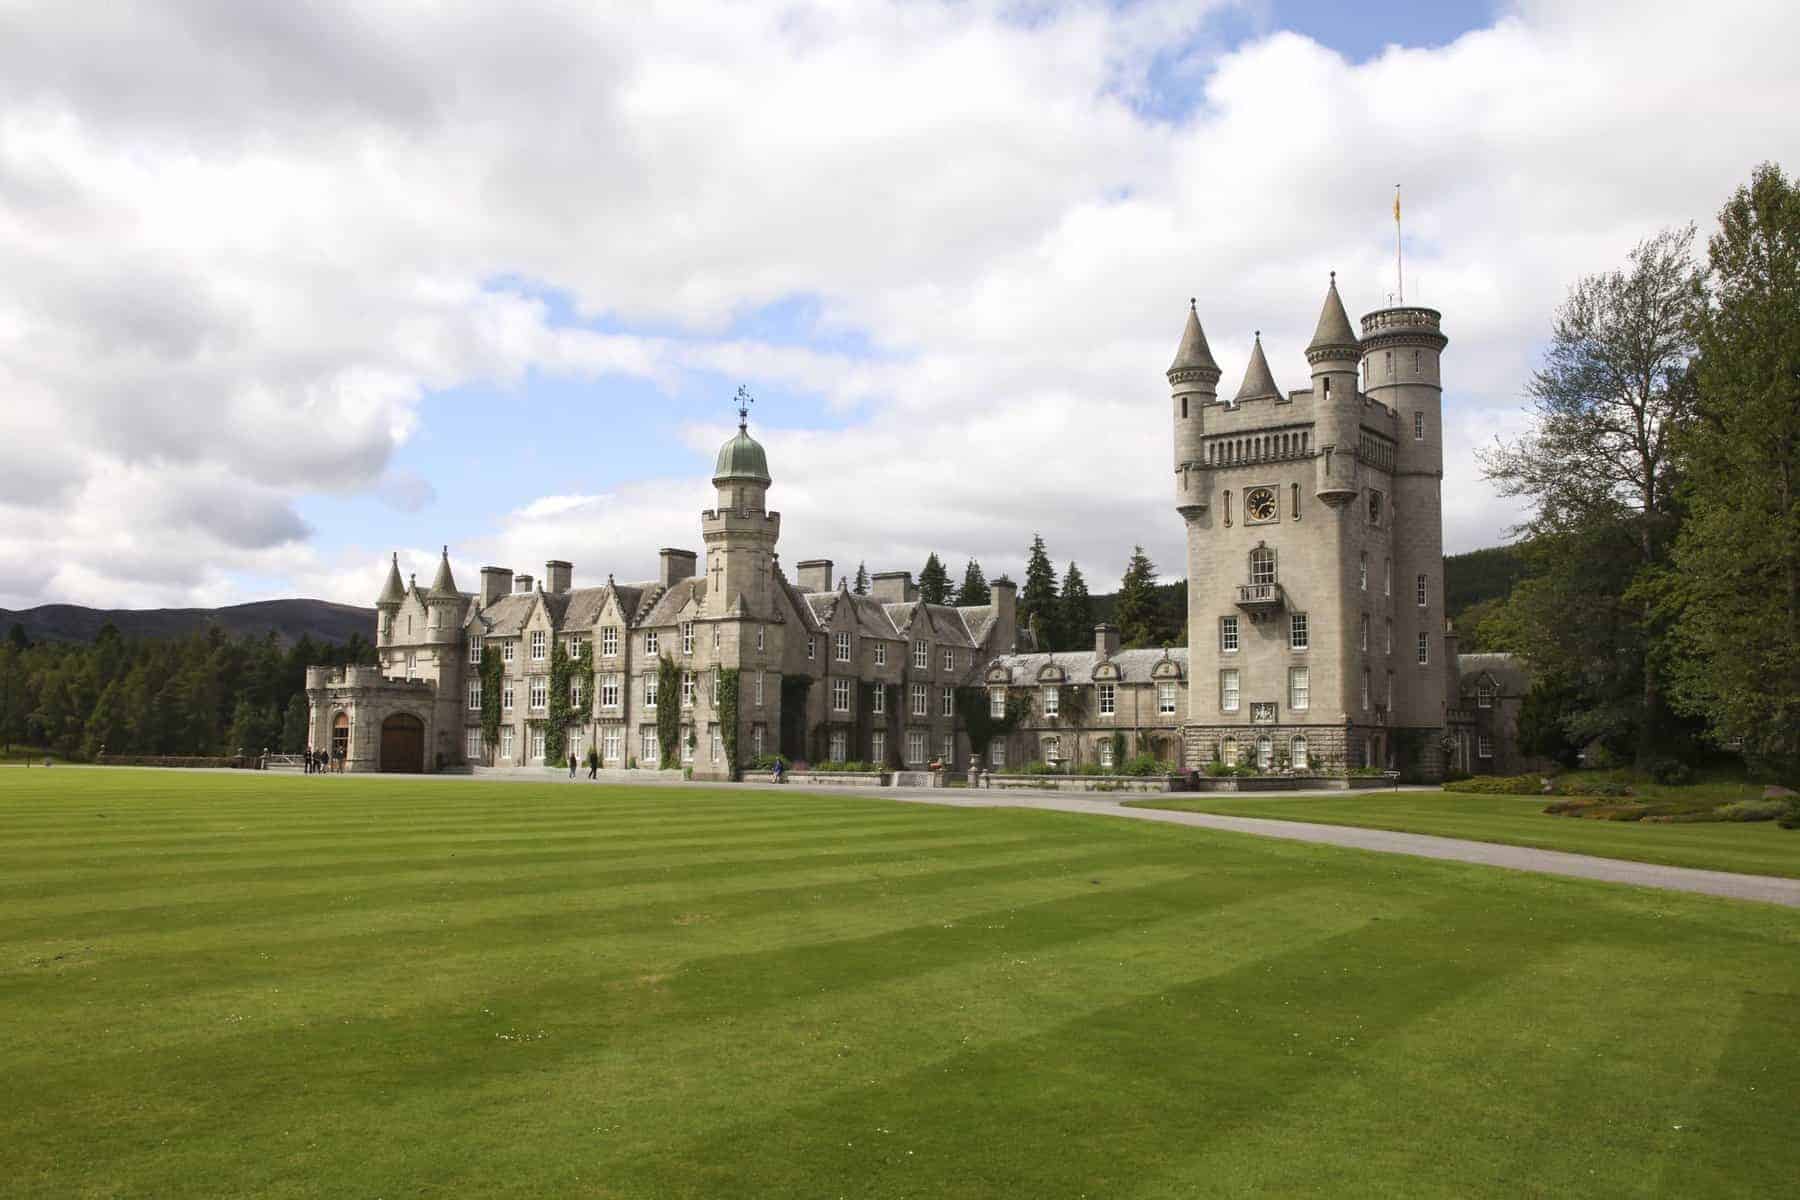 Balmoral castle in Scotland, holiday home of British royalty